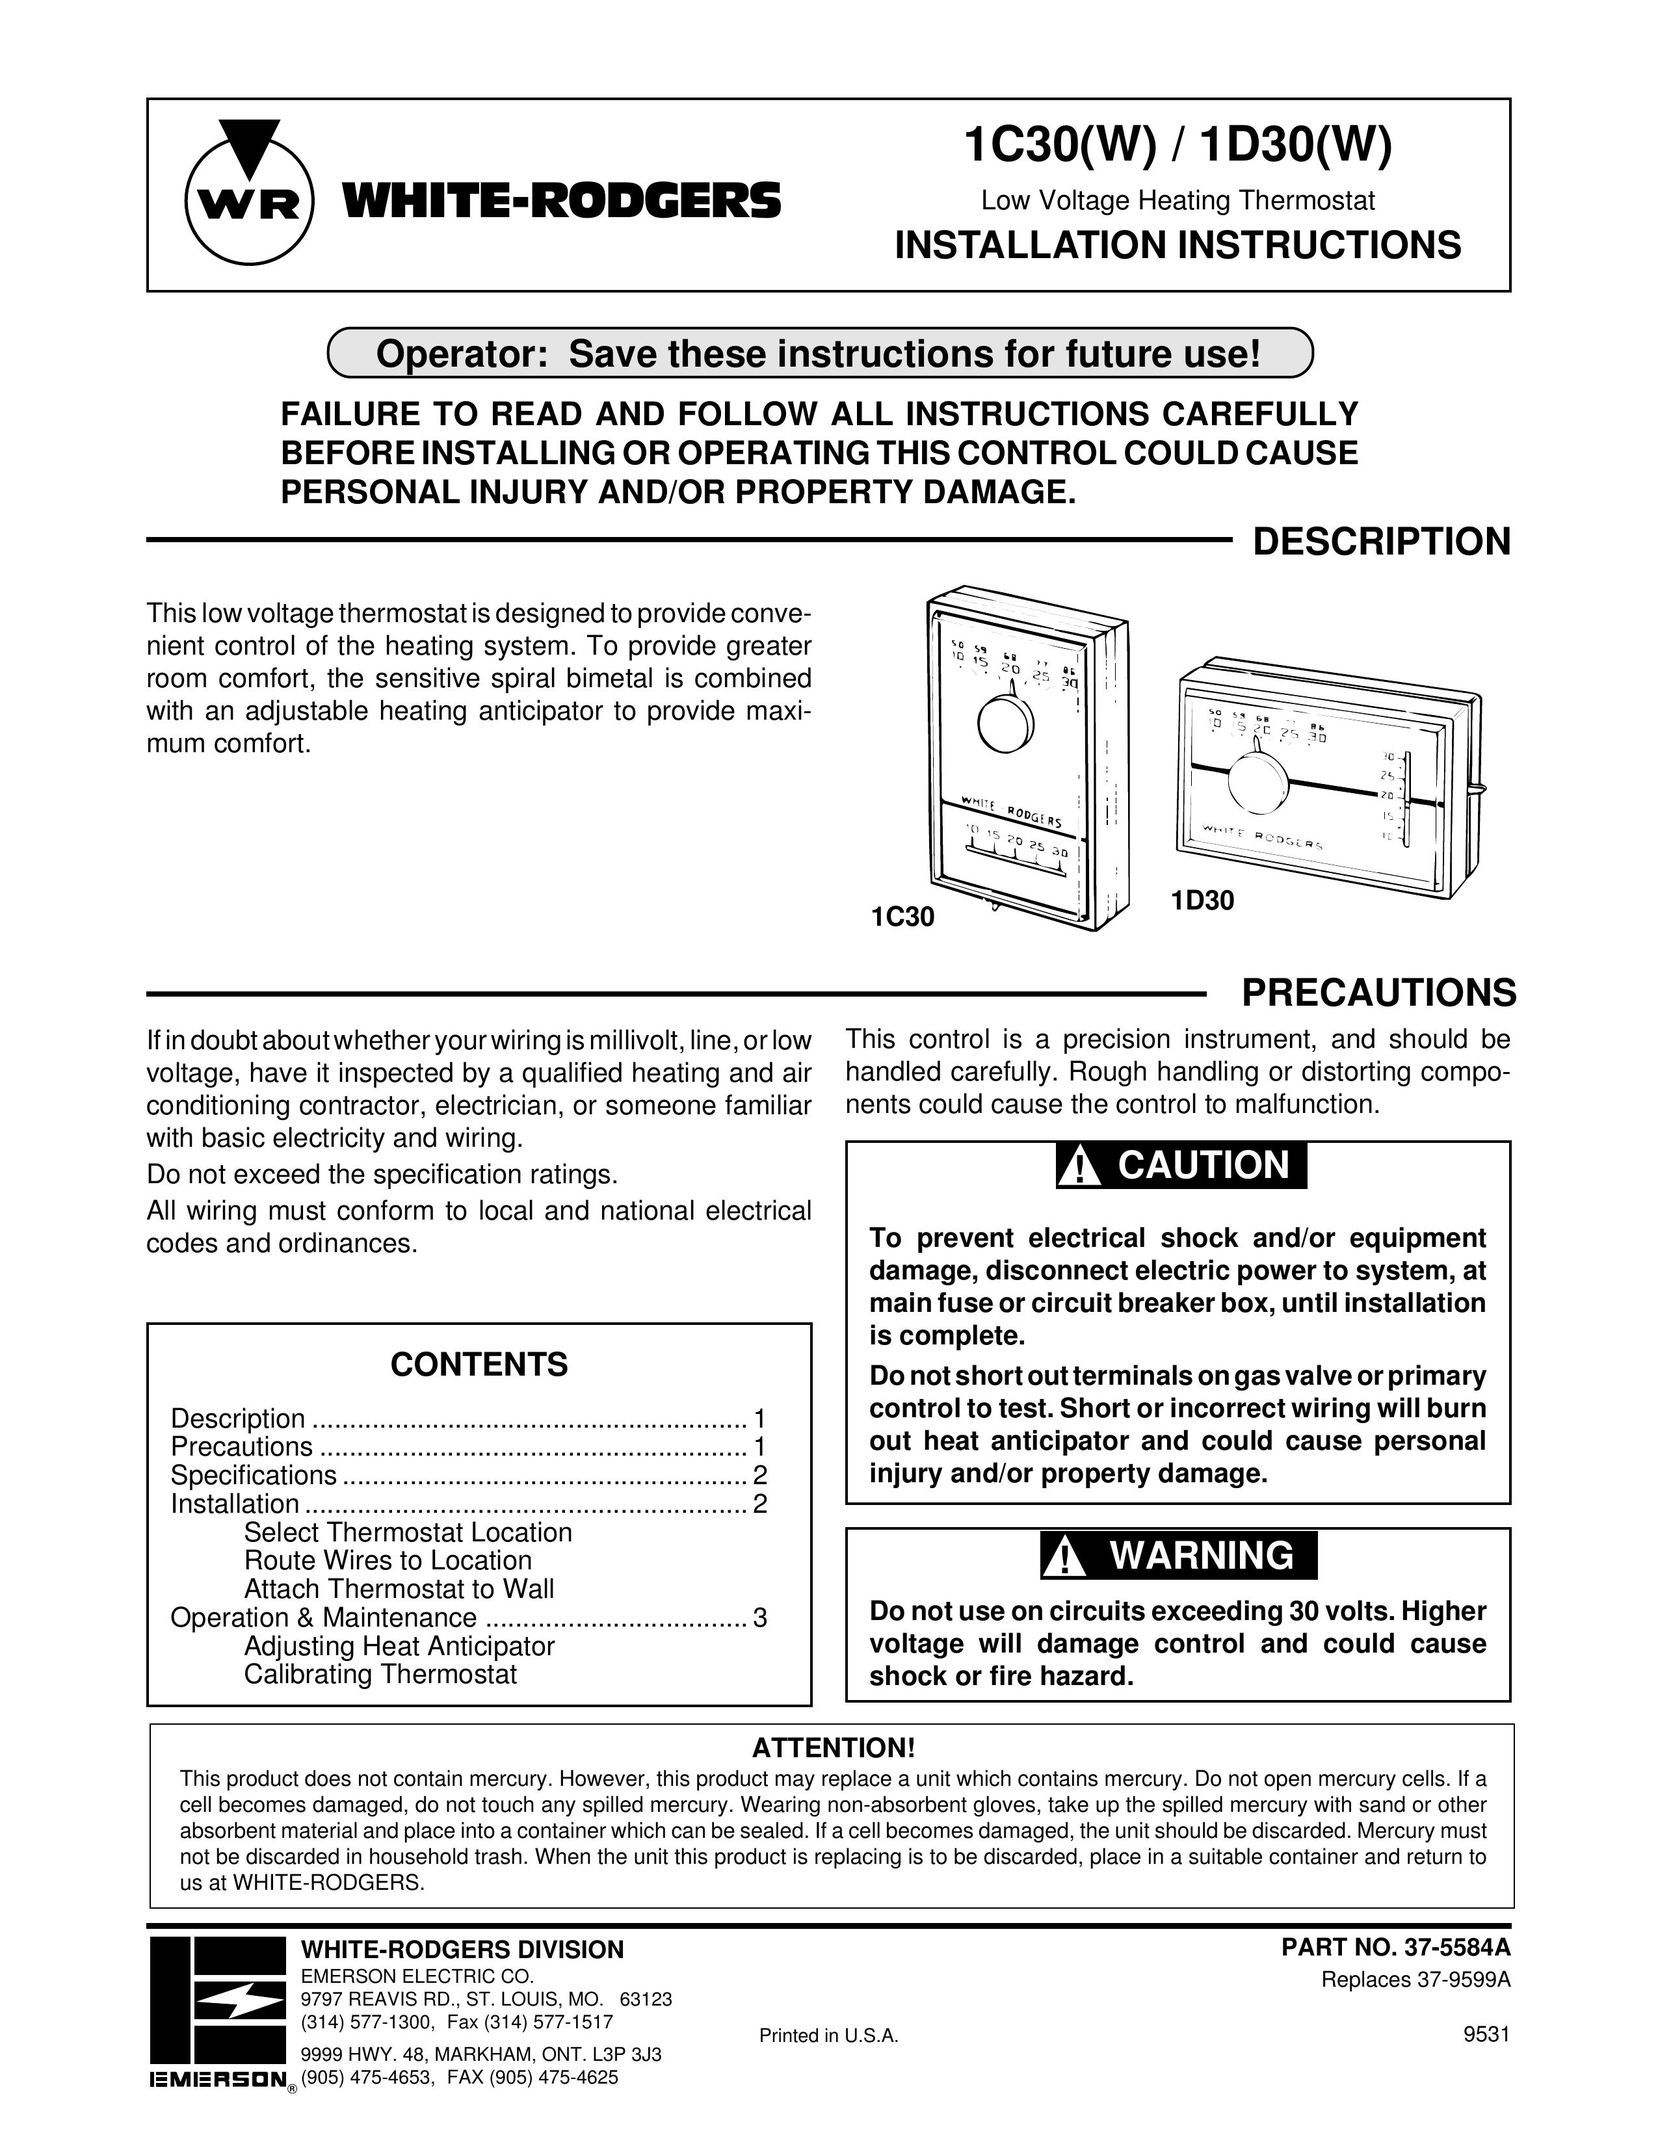 White Rodgers 1C30(W) Thermostat User Manual